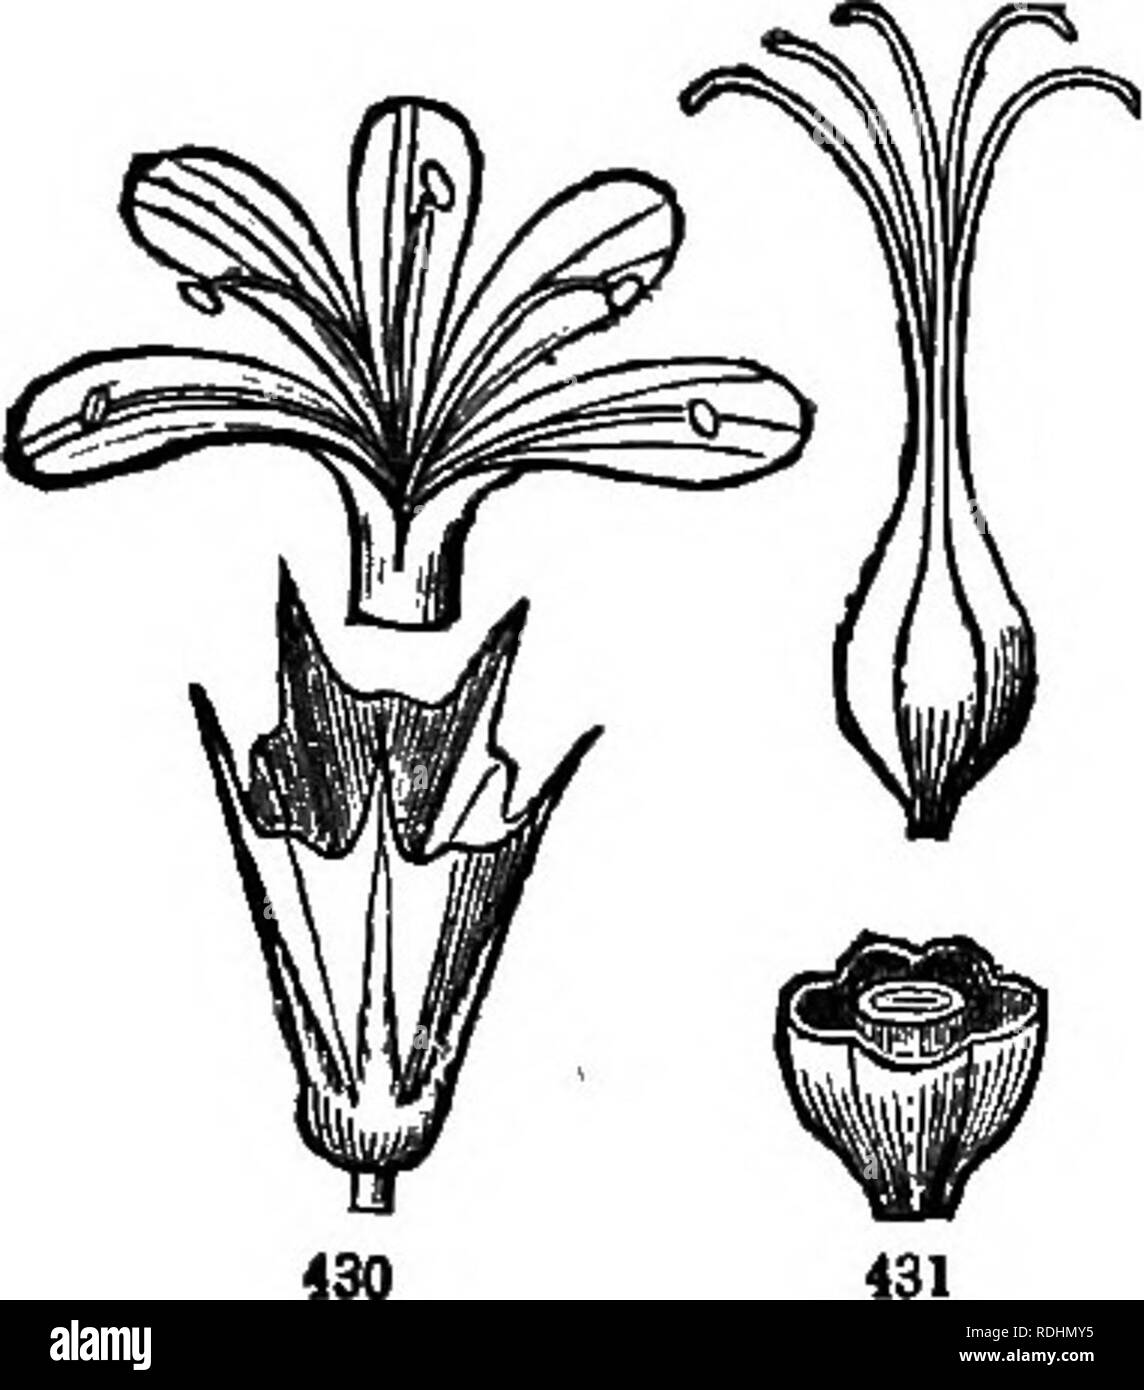 . Botany for young people and common schools : how plants grow, a simple introduction to structural botany : with a popular flora, or an arrangement and description of common plants both wild and cultivated : illustrated by 500 wood engravings . Botany. POPULAR FLORA. 173. 57. LEADWORT FAMILY. Order PLUMBAGINACEJE. Familiar to us in two plants only, viz. Marsh-Eosbmary on the coast, and Thrift in gardens; known by having a dry and scaly funnel-shaped calyx, and 5 petals united only'at their base, with a stamen before each, and 5 styles on a single one-seeded ovary. Flowers (rose-color) in a ro Stock Photo